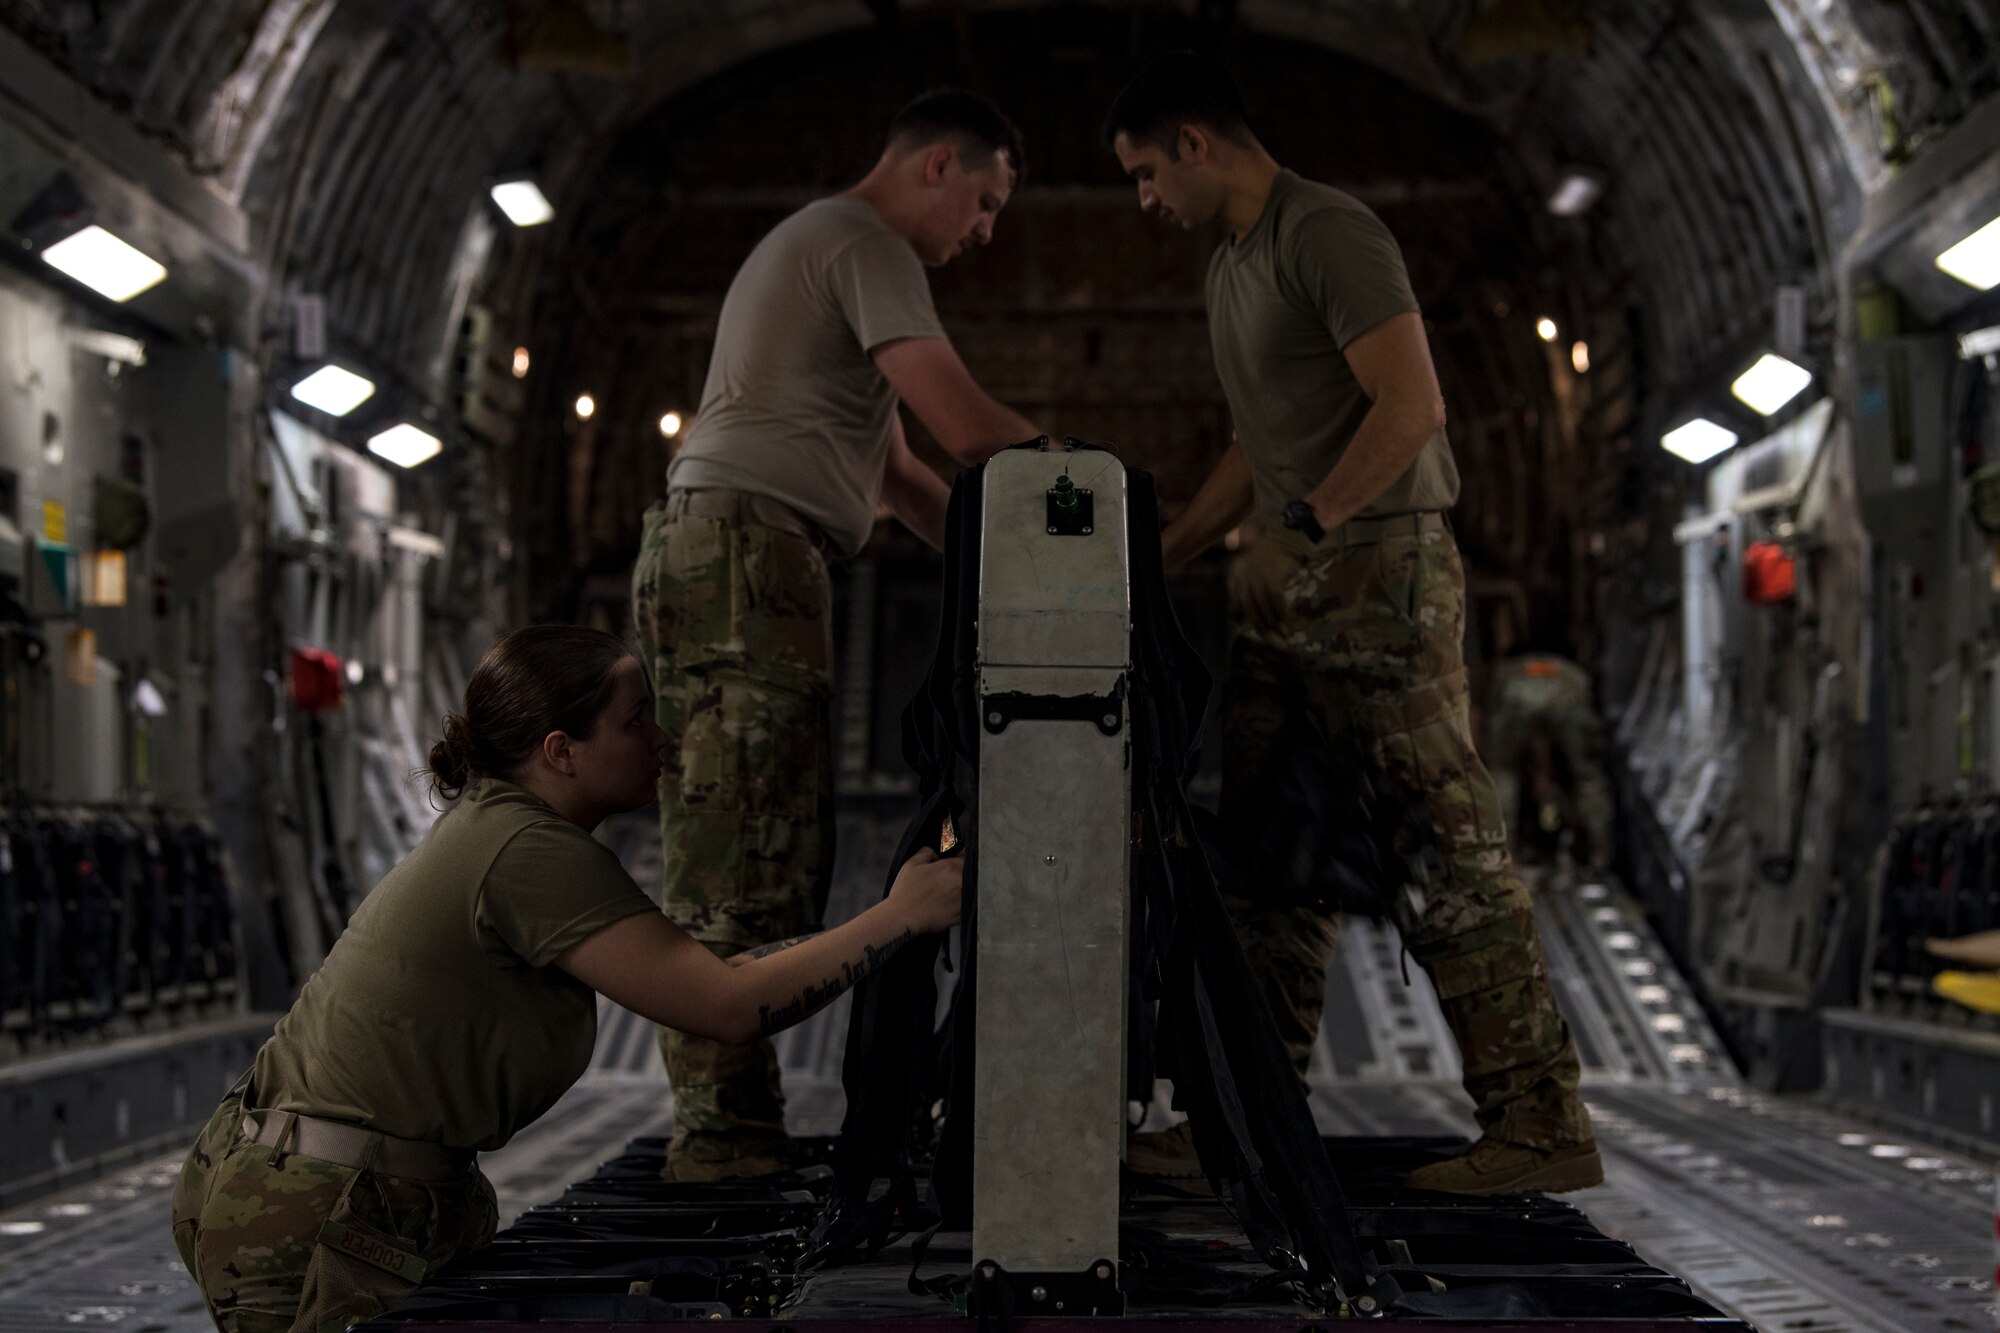 U.S. Air Force Airmen assigned to the 816th Expeditionary Airlift Squadron assemble passenger seats on a U.S. Air Force C-17 Globemaster III at Al Udeid Air Base, Qatar, Jan. 10, 2020.